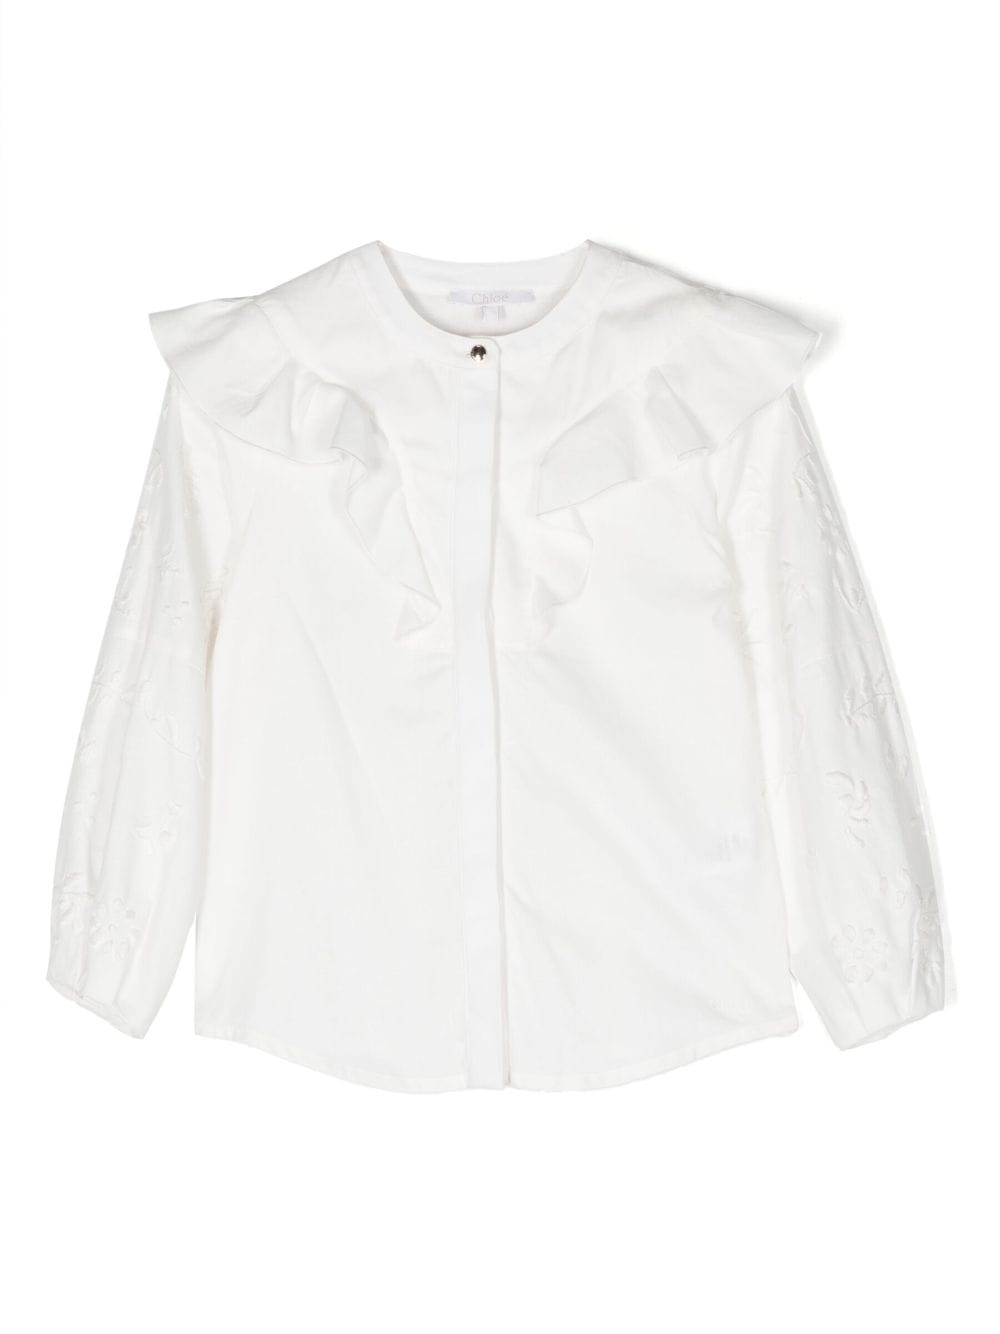 Image 1 of Chloé Kids embroidered-design cotton blouse